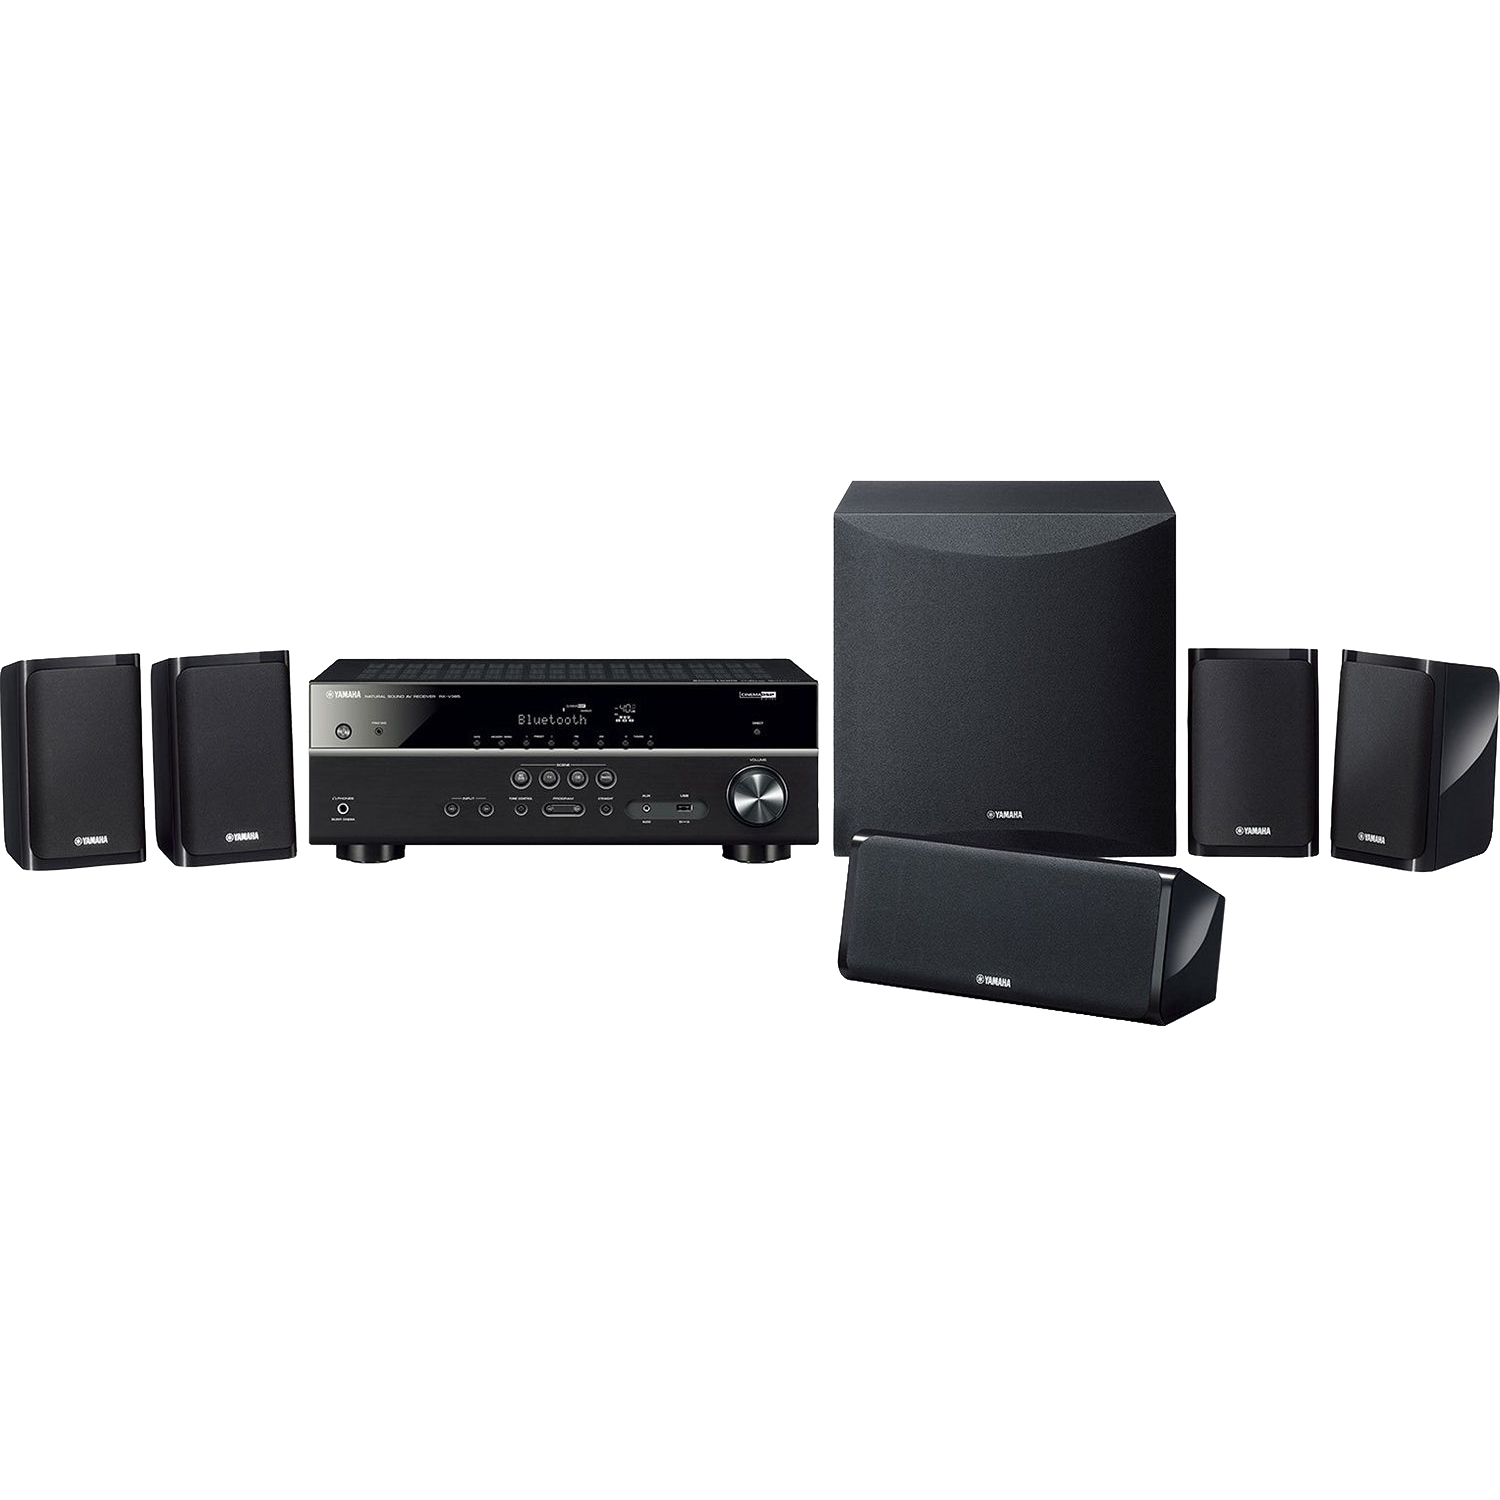 Presentator Reden wimper YAMAHA YHT-4950U 5.1-Ch Home Theater System | Accessories4less